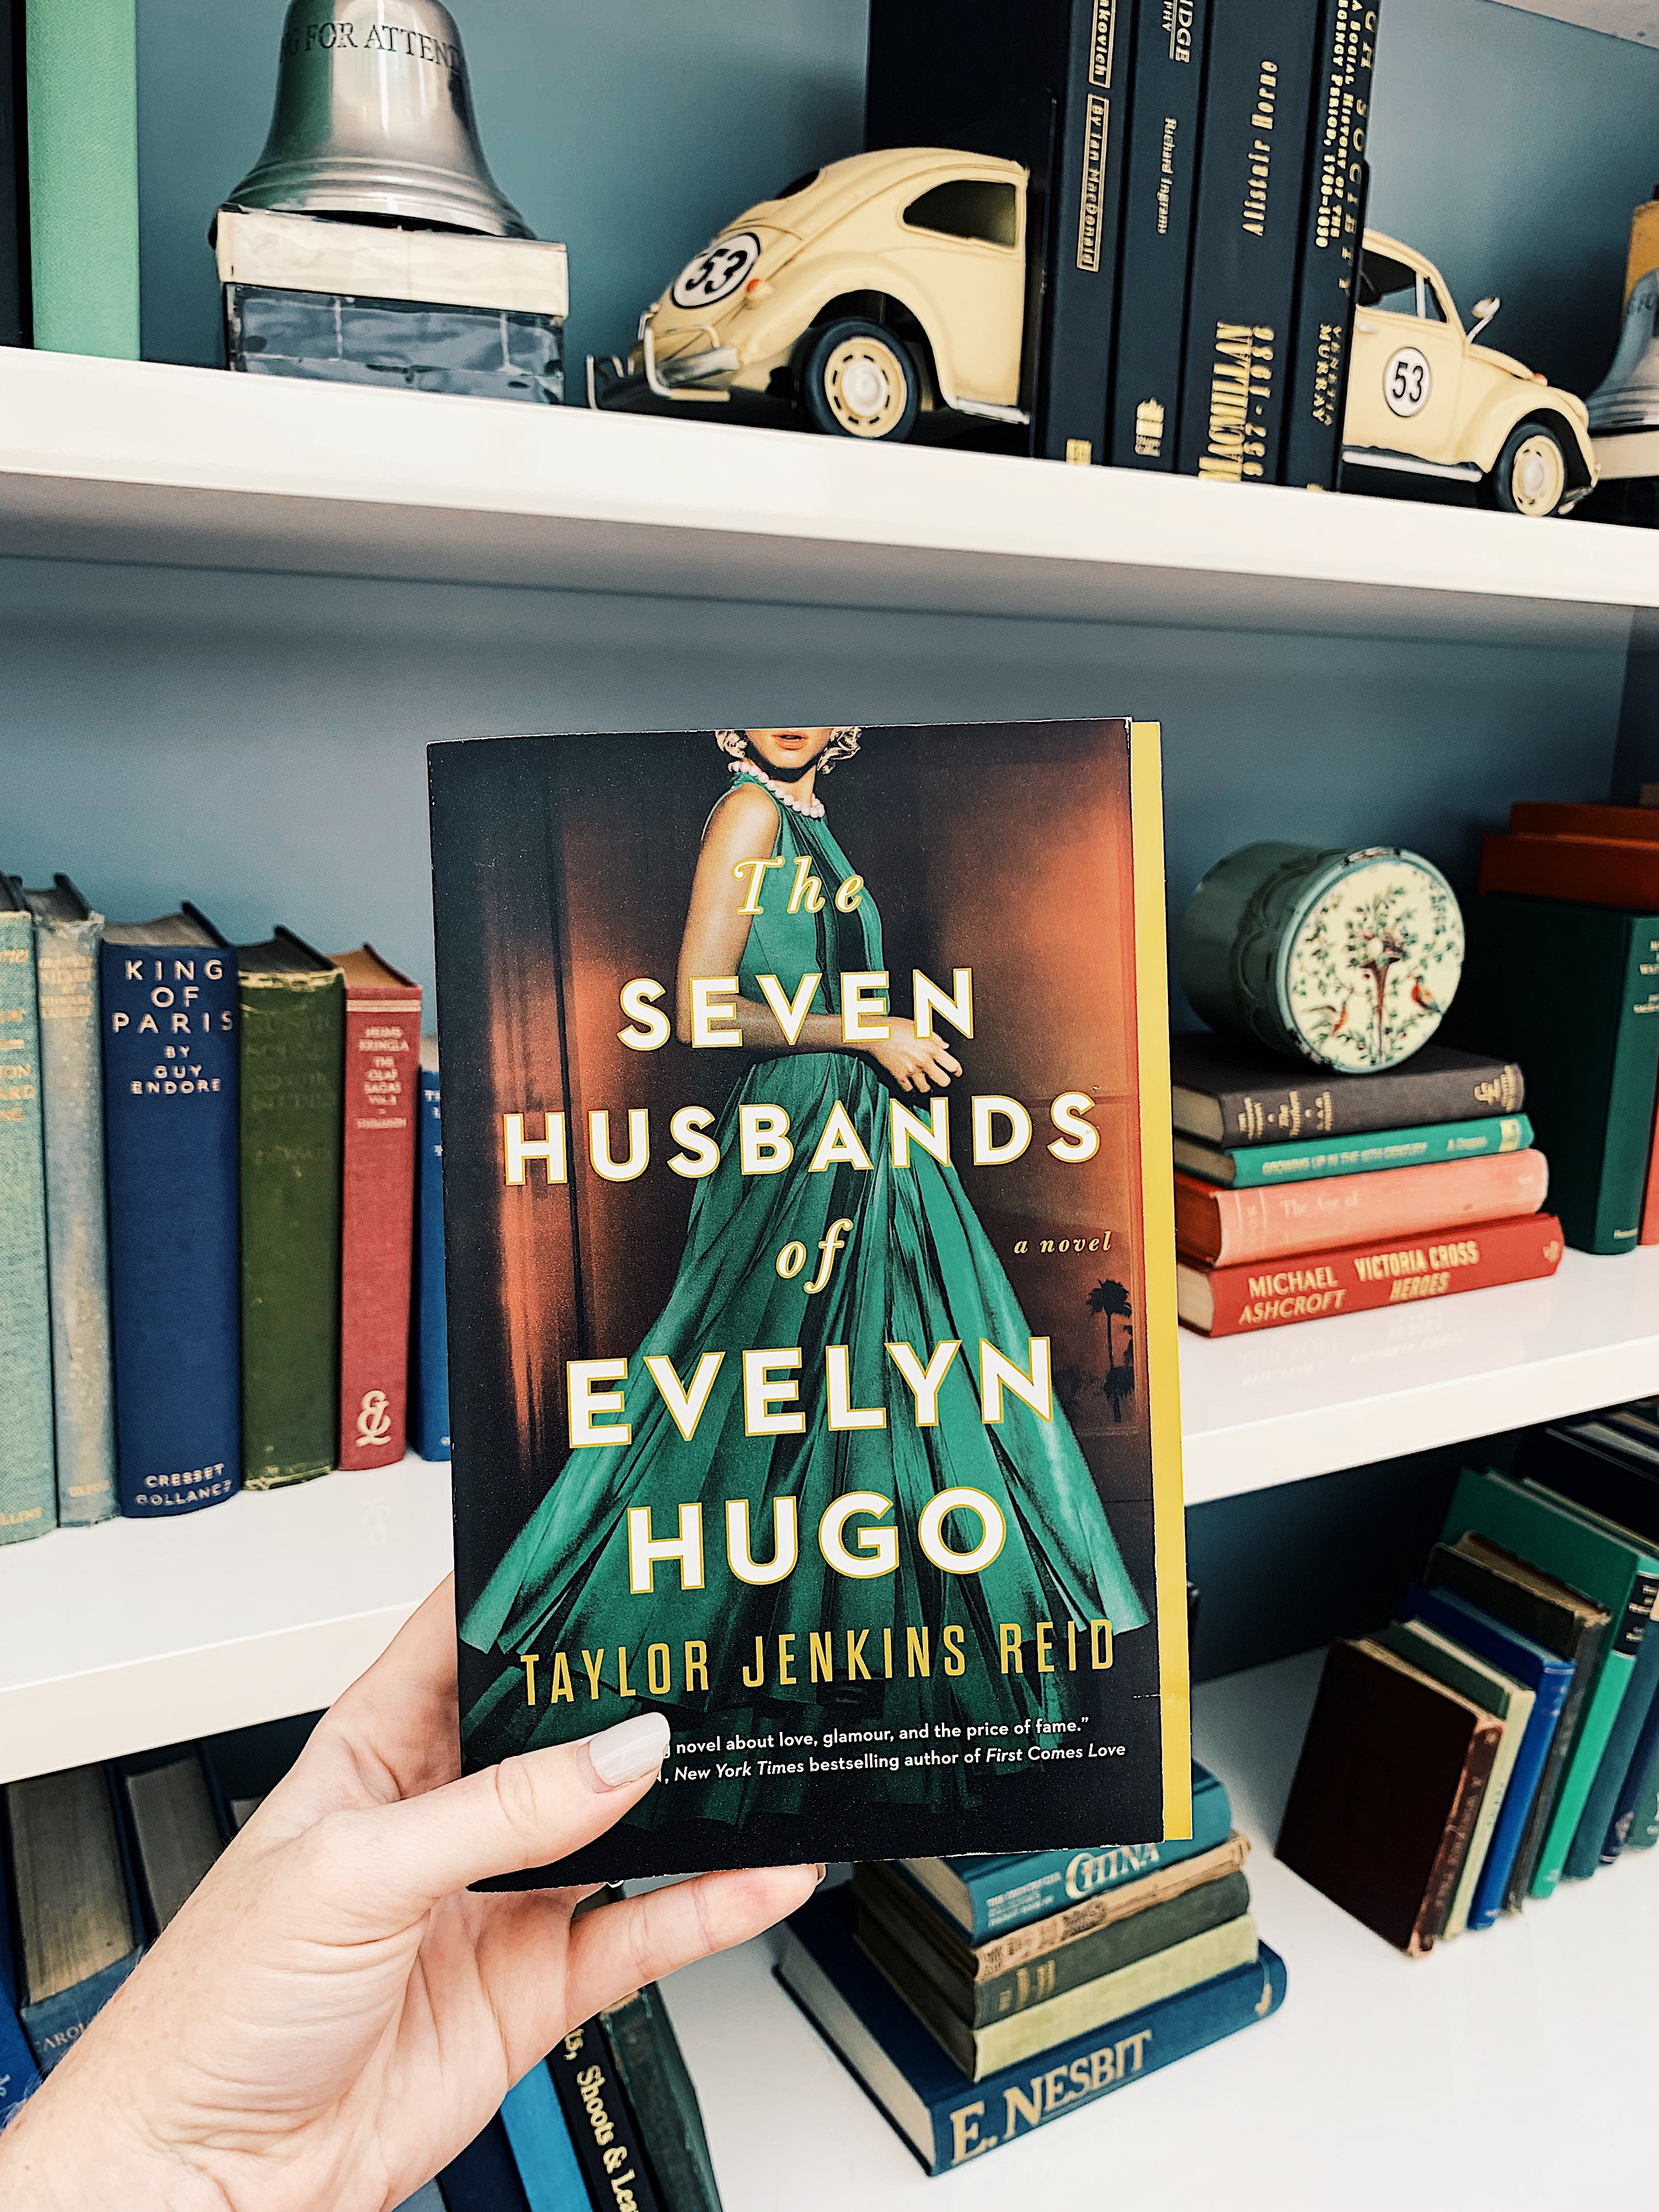 The Seven Husbands of Evelyn Hugo by Taylor Jenkins Reid in hand